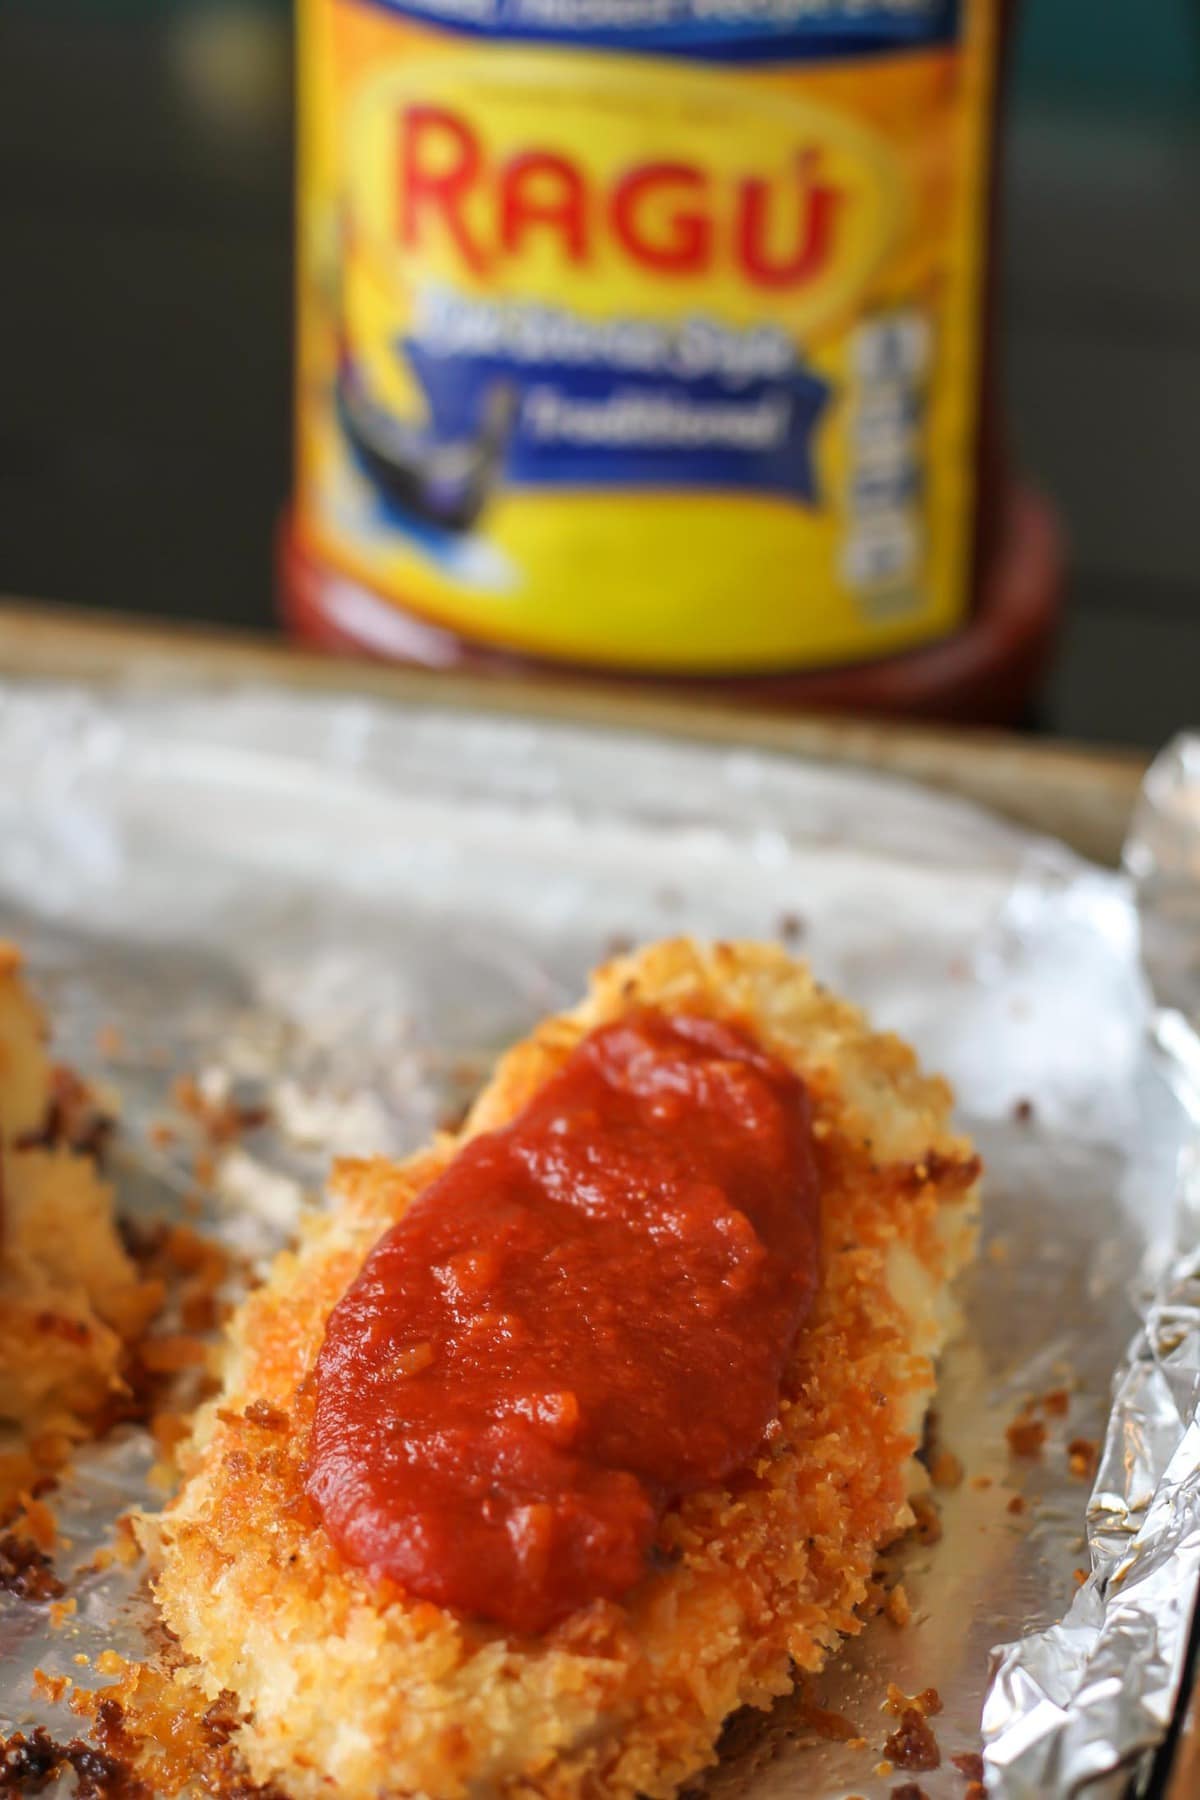 Baked breaded chicken topped with Ragú sauce.